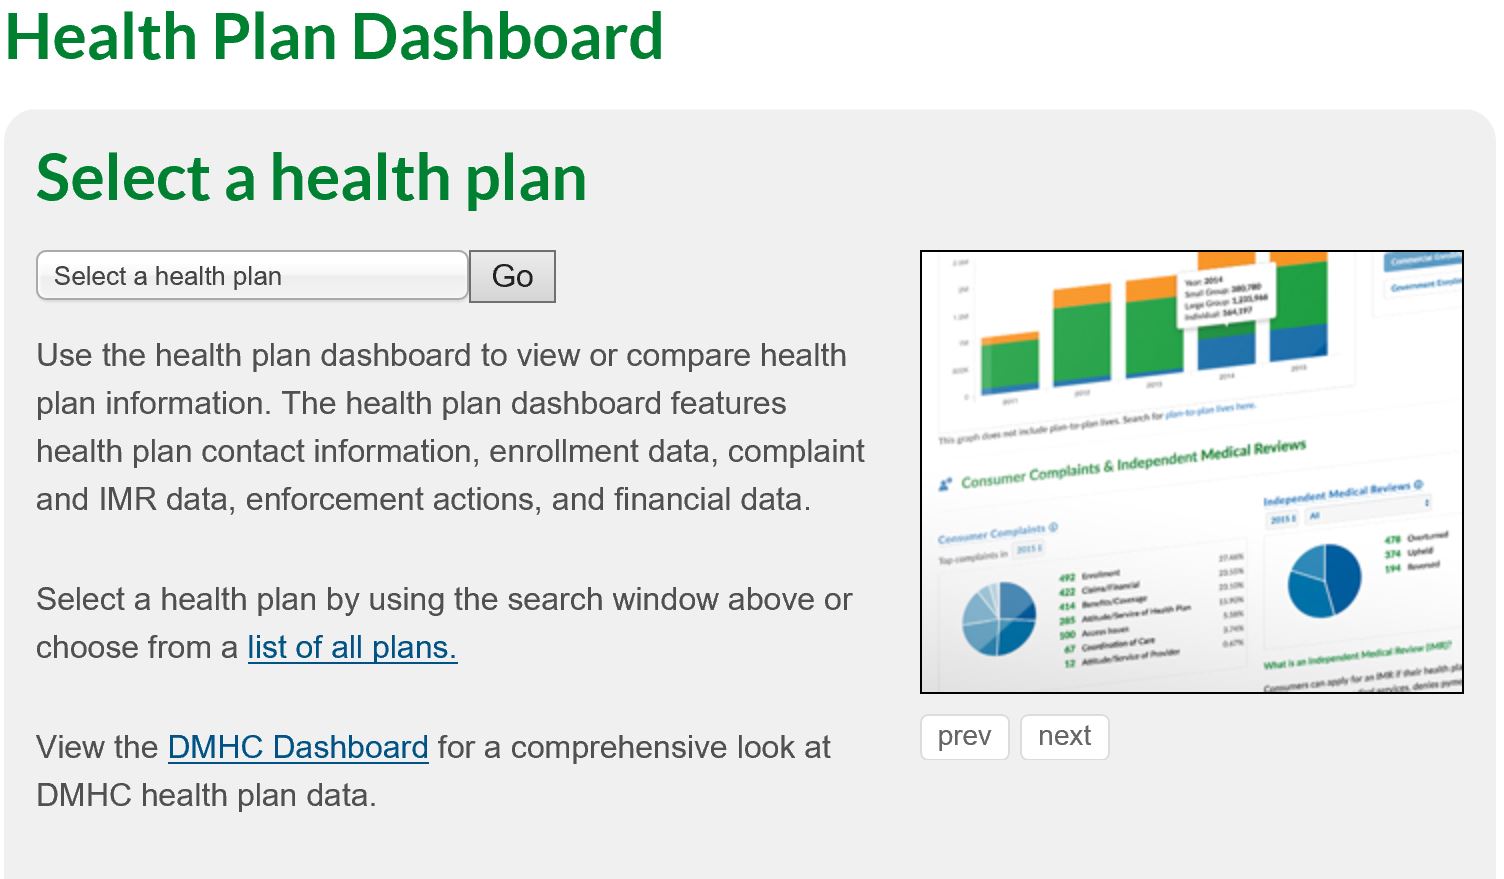 Compare CA health plans with the DMHC dashboard